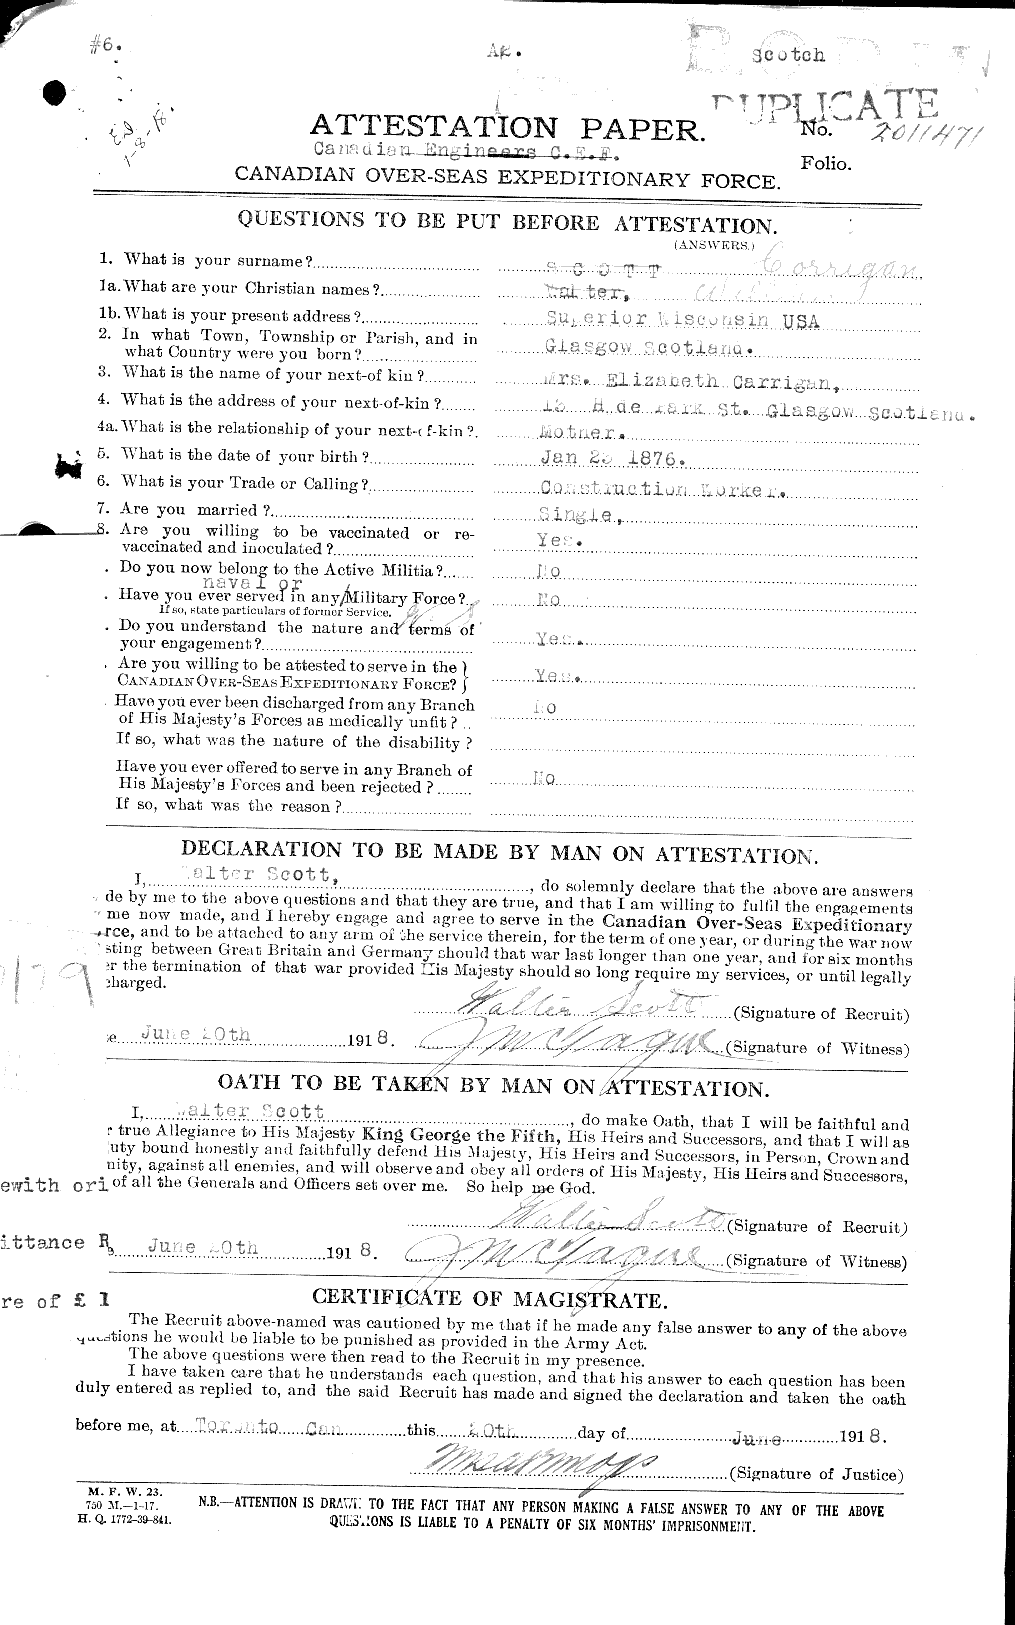 Personnel Records of the First World War - CEF 005489a